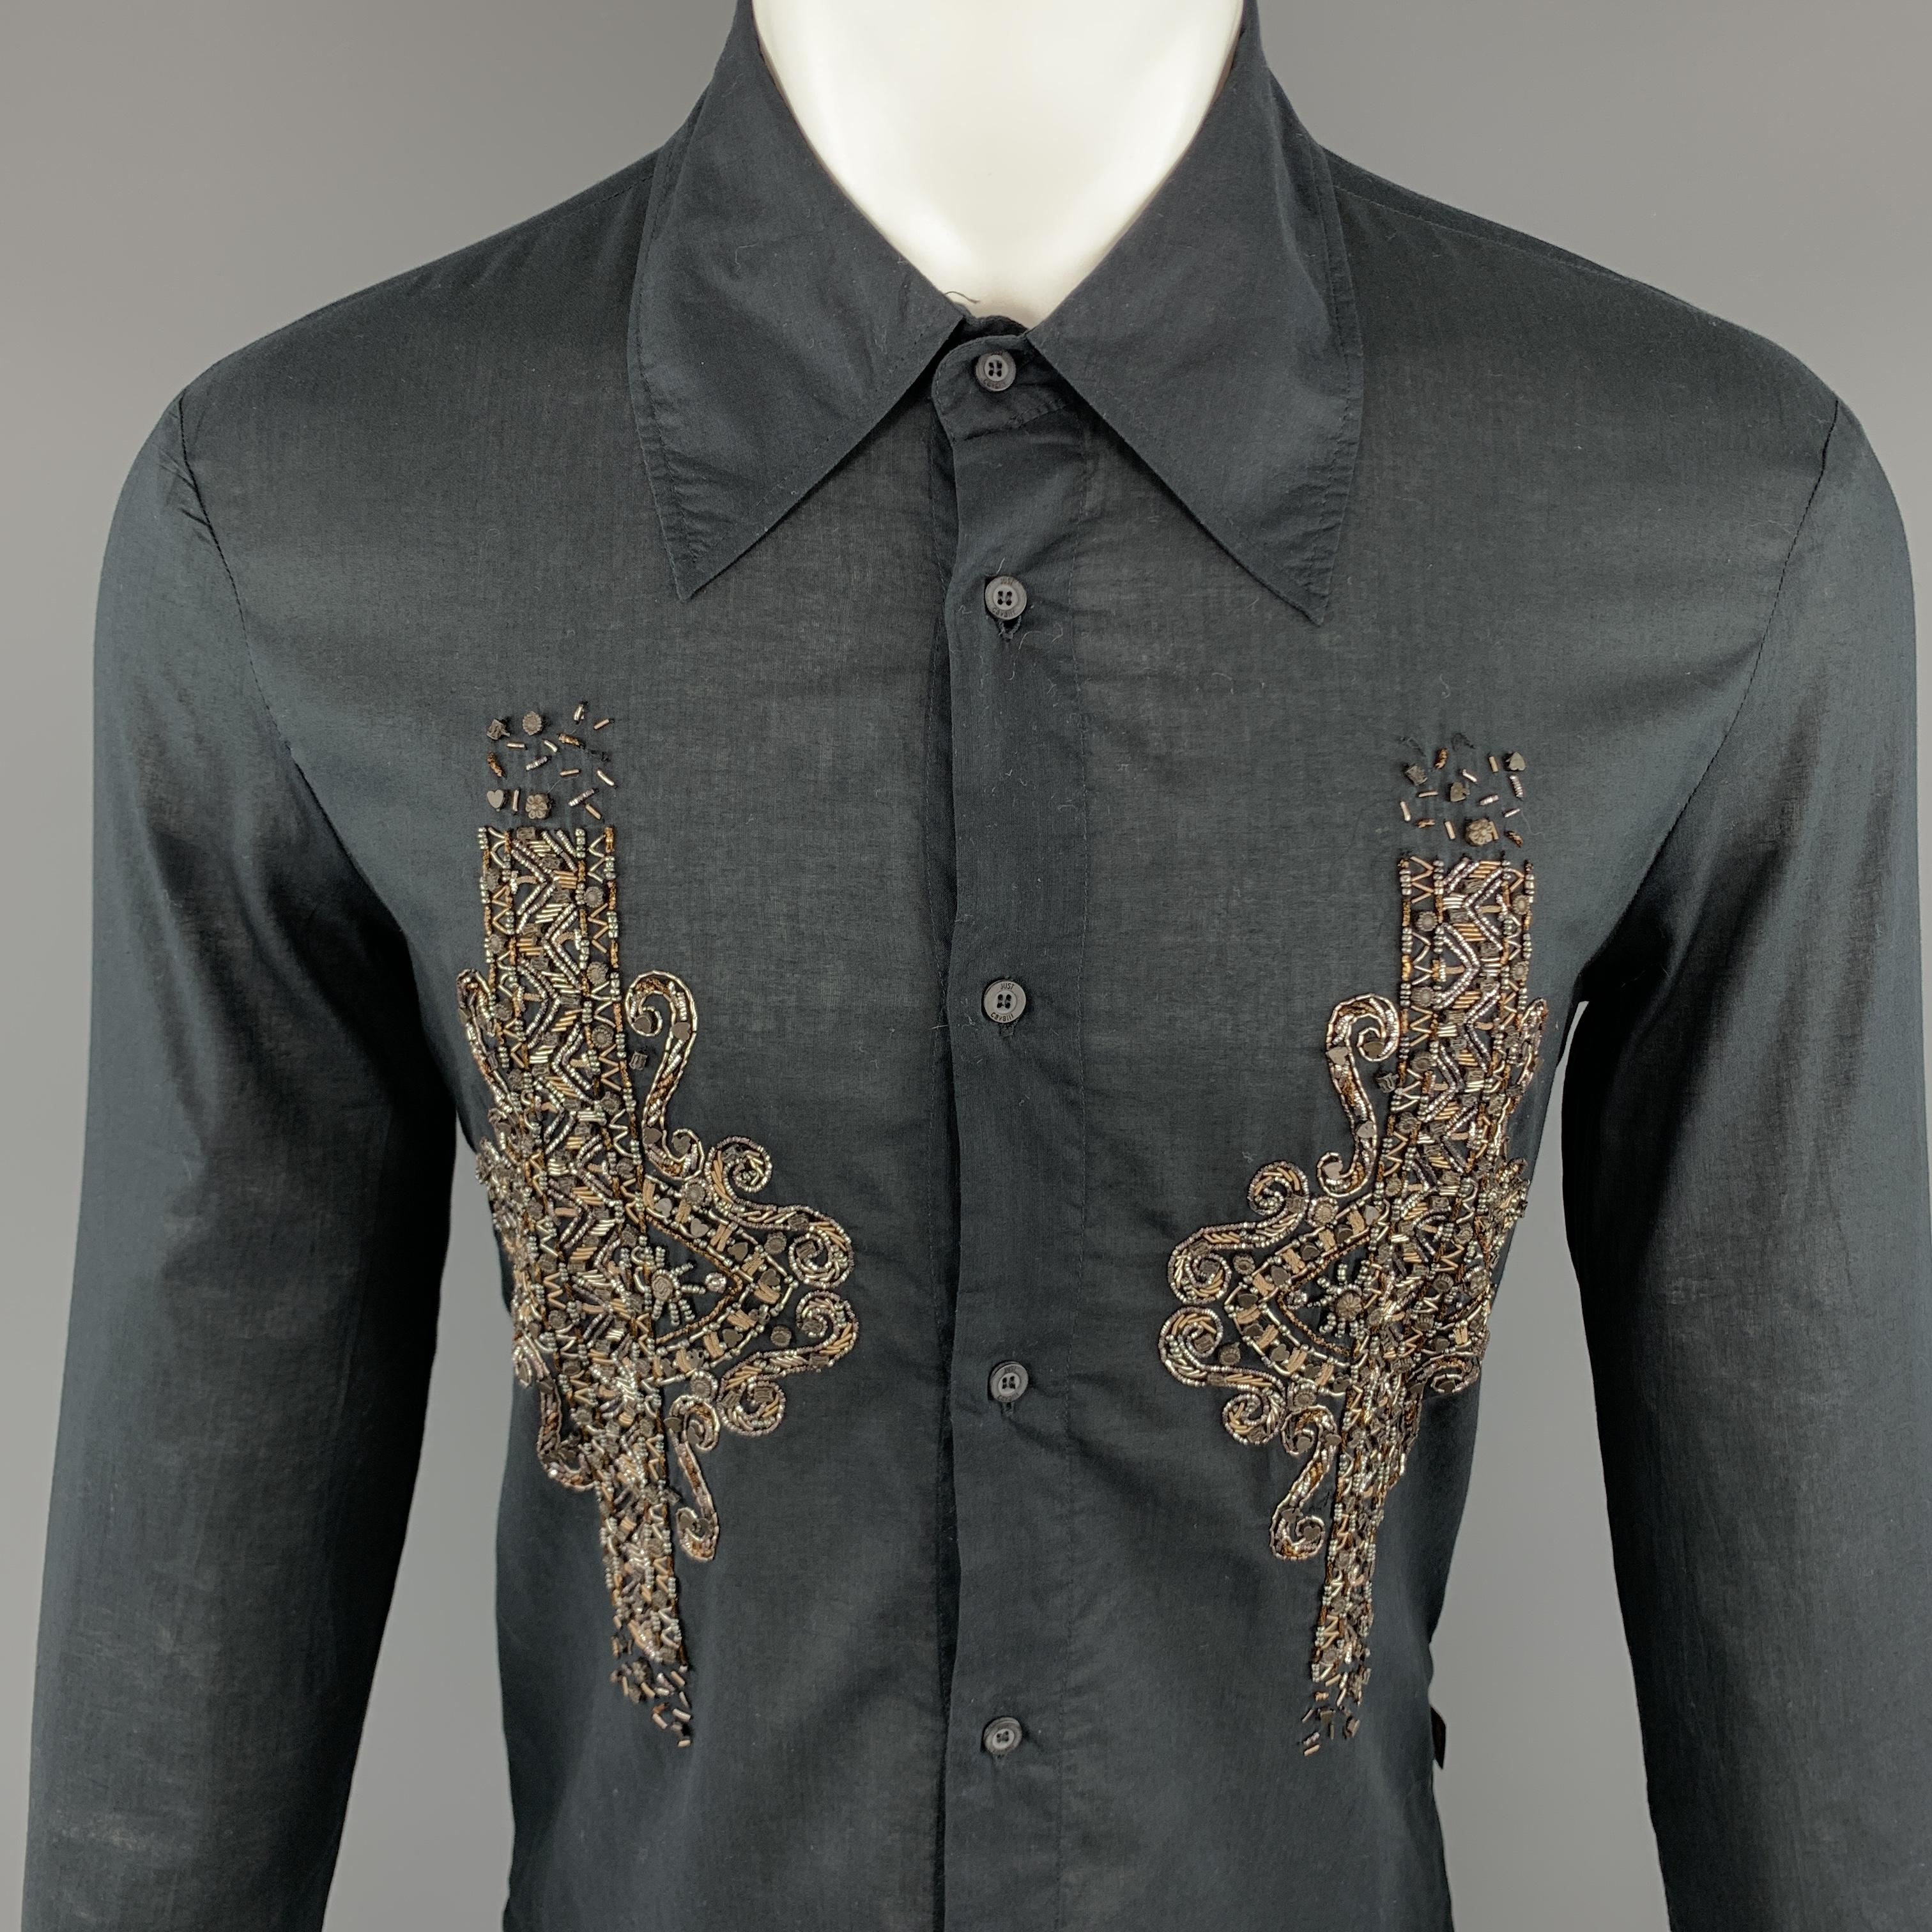 JUST CAVALLI  Long Sleeve Shirt comes in a black tone in a solid cotton material, with a pointed collar, embellishment at front, double buttoned cuffs, button up. Made in Italy.

Excellent Pre-Owned Condition.
Marked: IT 50

Measurements:

Shoulder: